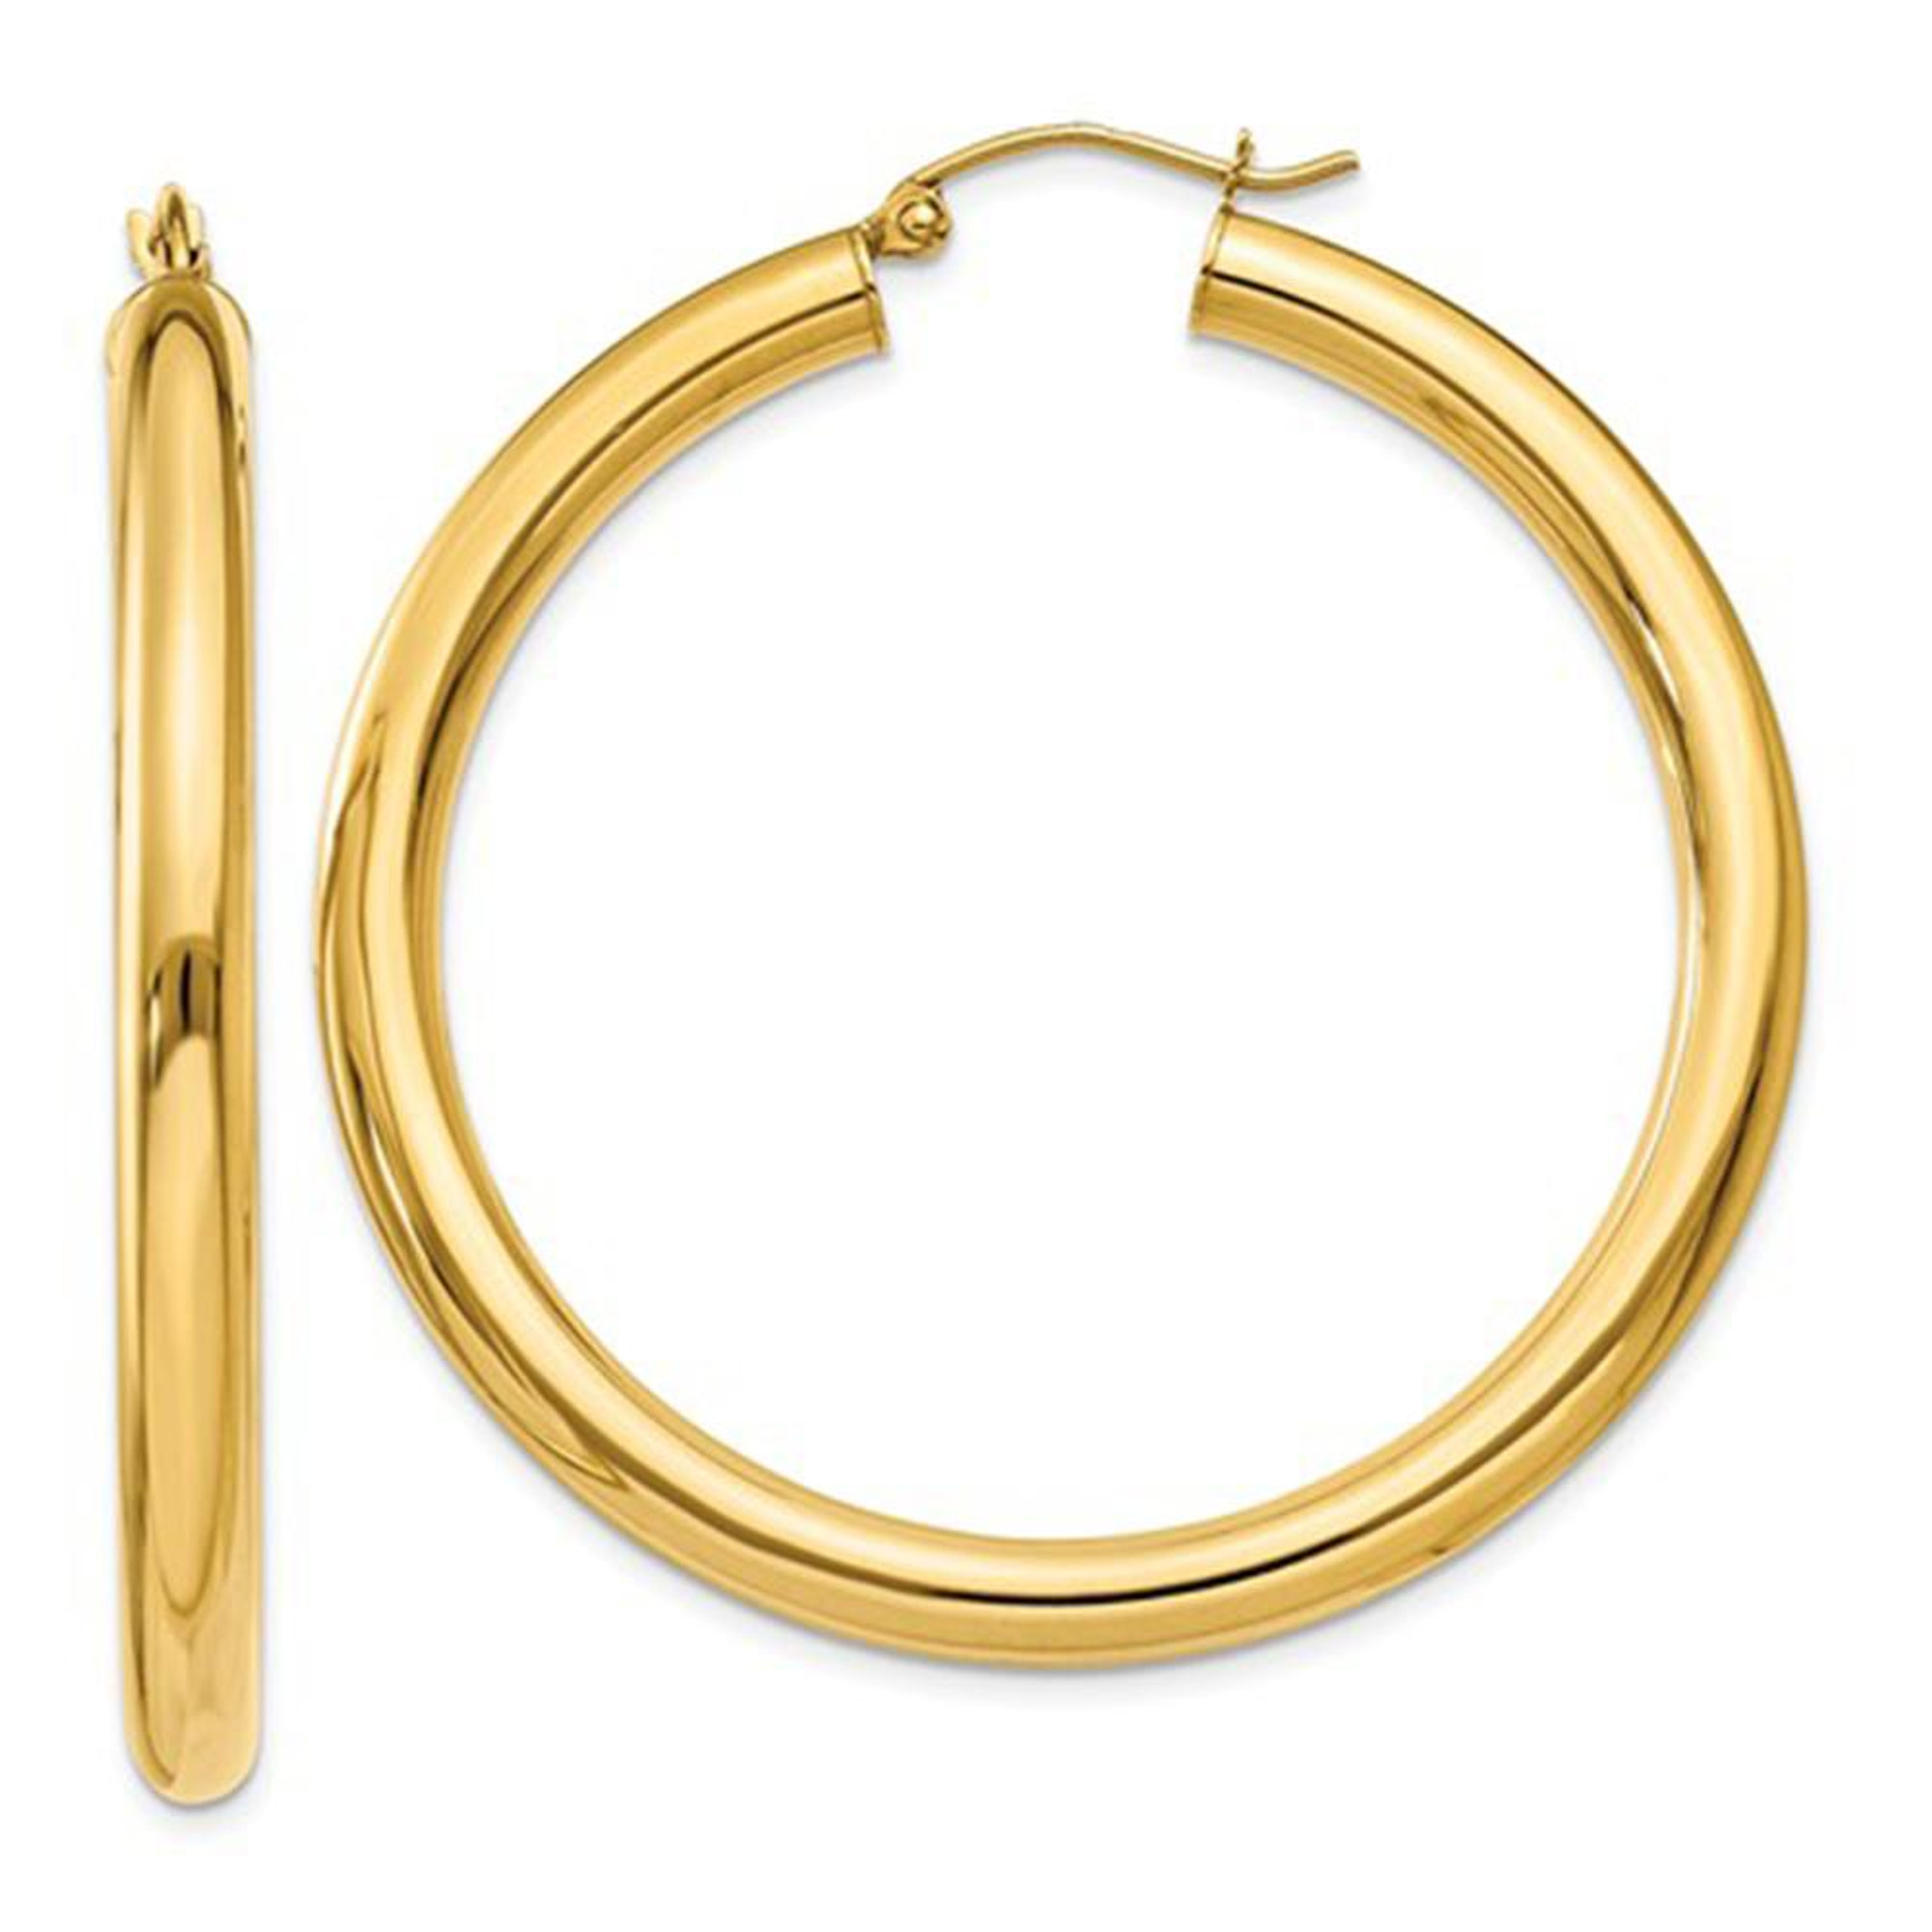 14K Yellow Gold 4 Mm By 30Mm Wide High Polished Hoop Earrings | Sarraf.com